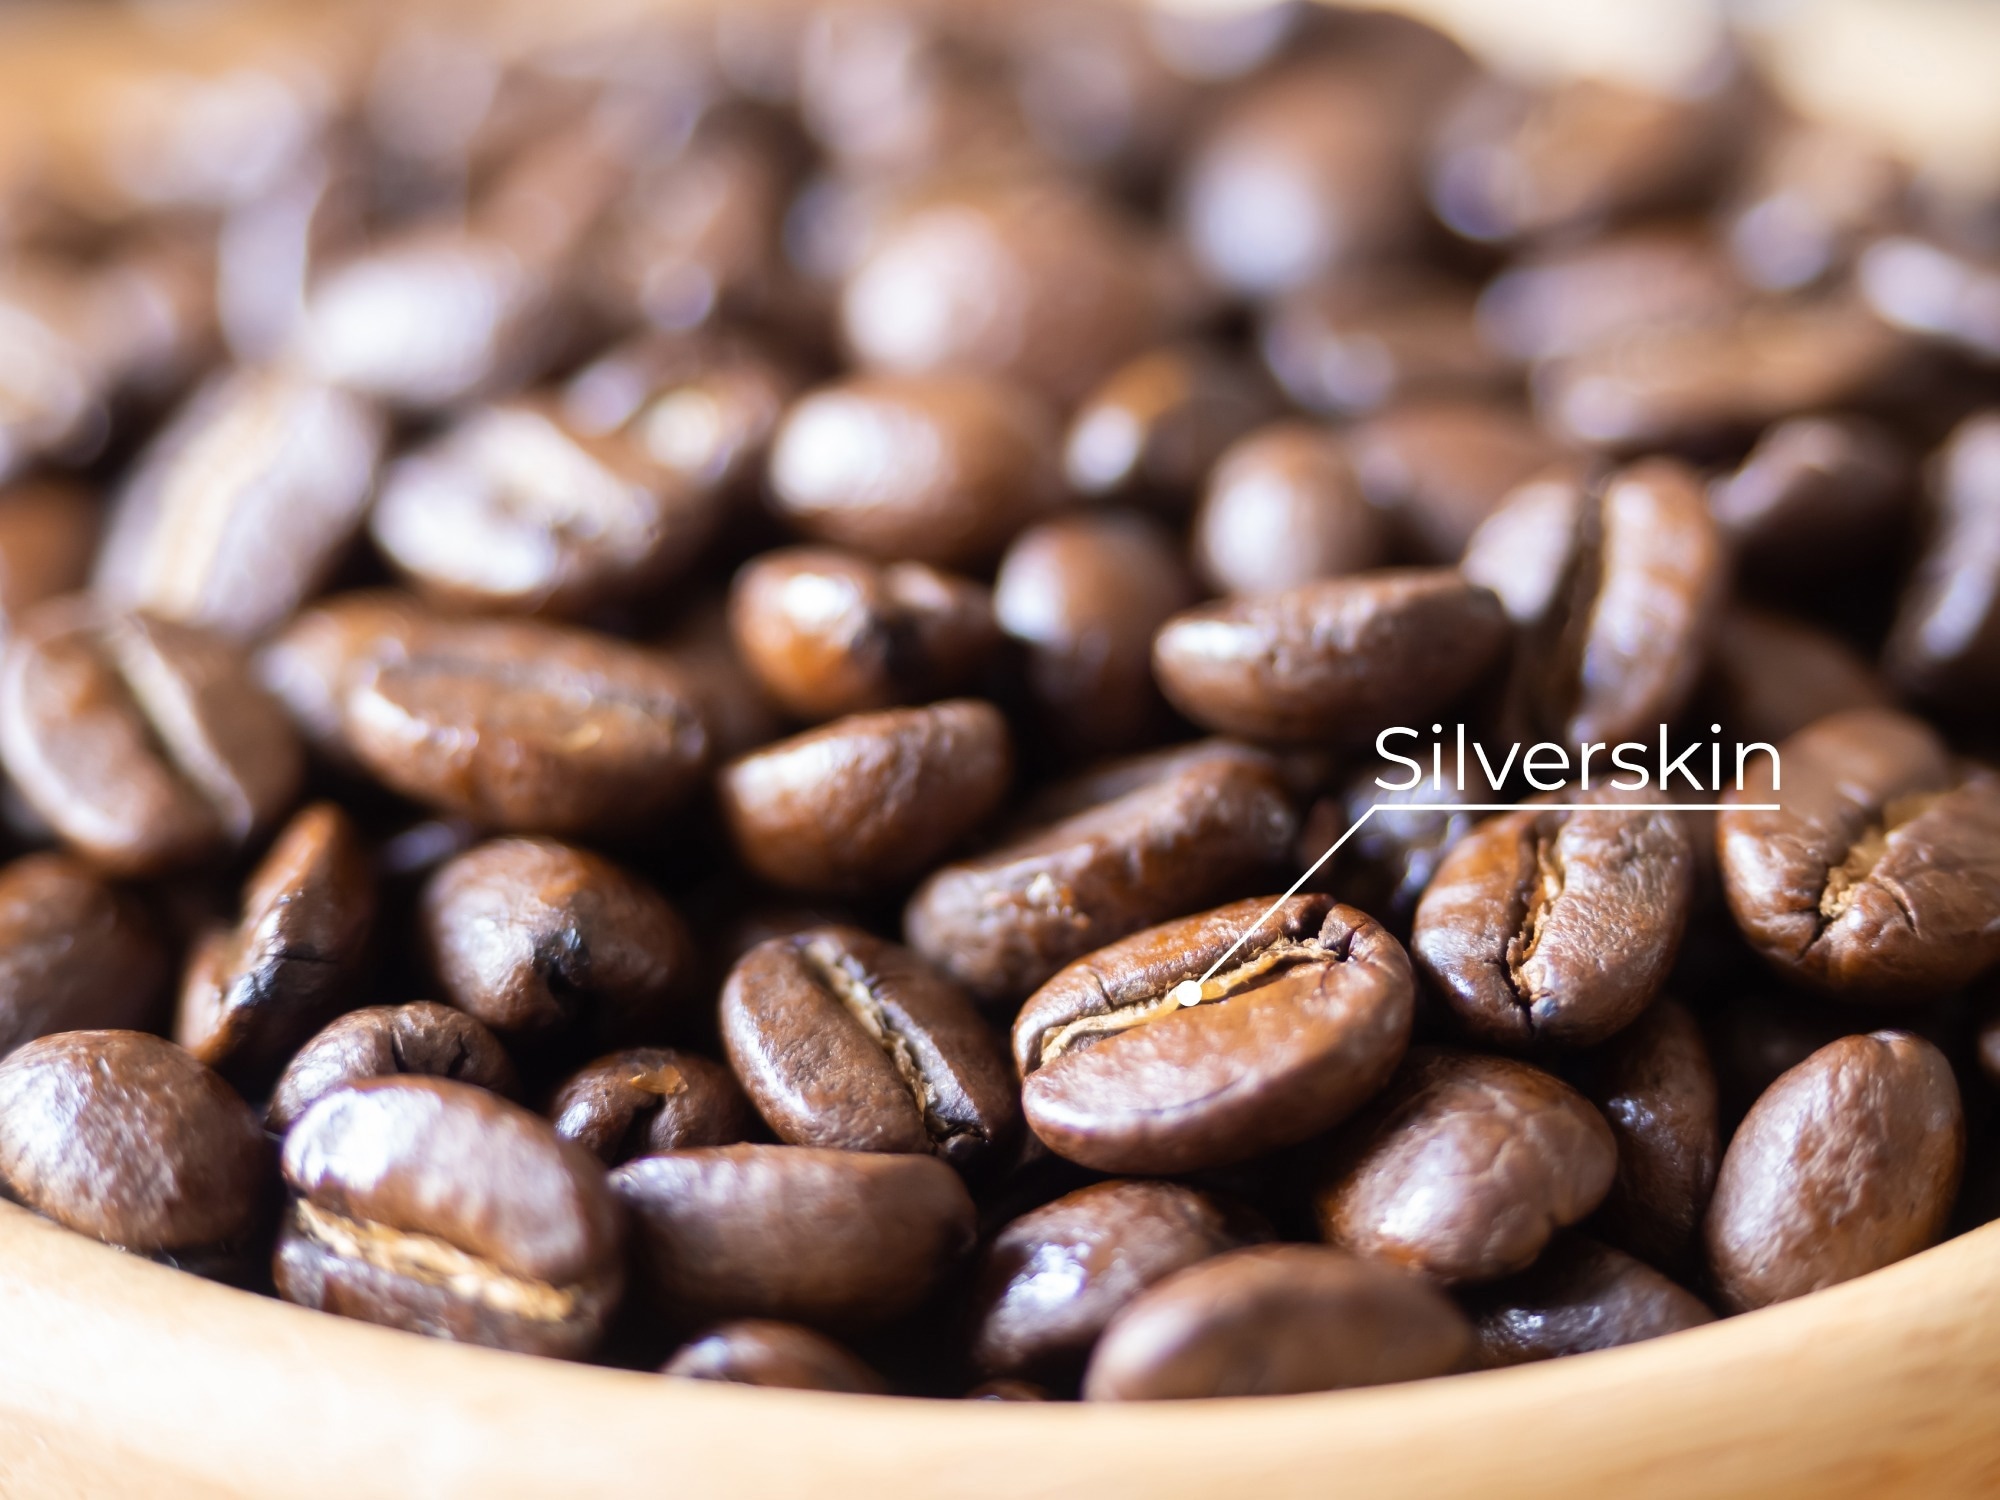 Study: Plant compounds of silver coffee as a new anti-aging functional food: a pharmacoinformatic approach combined with an in vitro study.  Image credit: Benjavisa Ruangvaree Art/Shutterstock.com